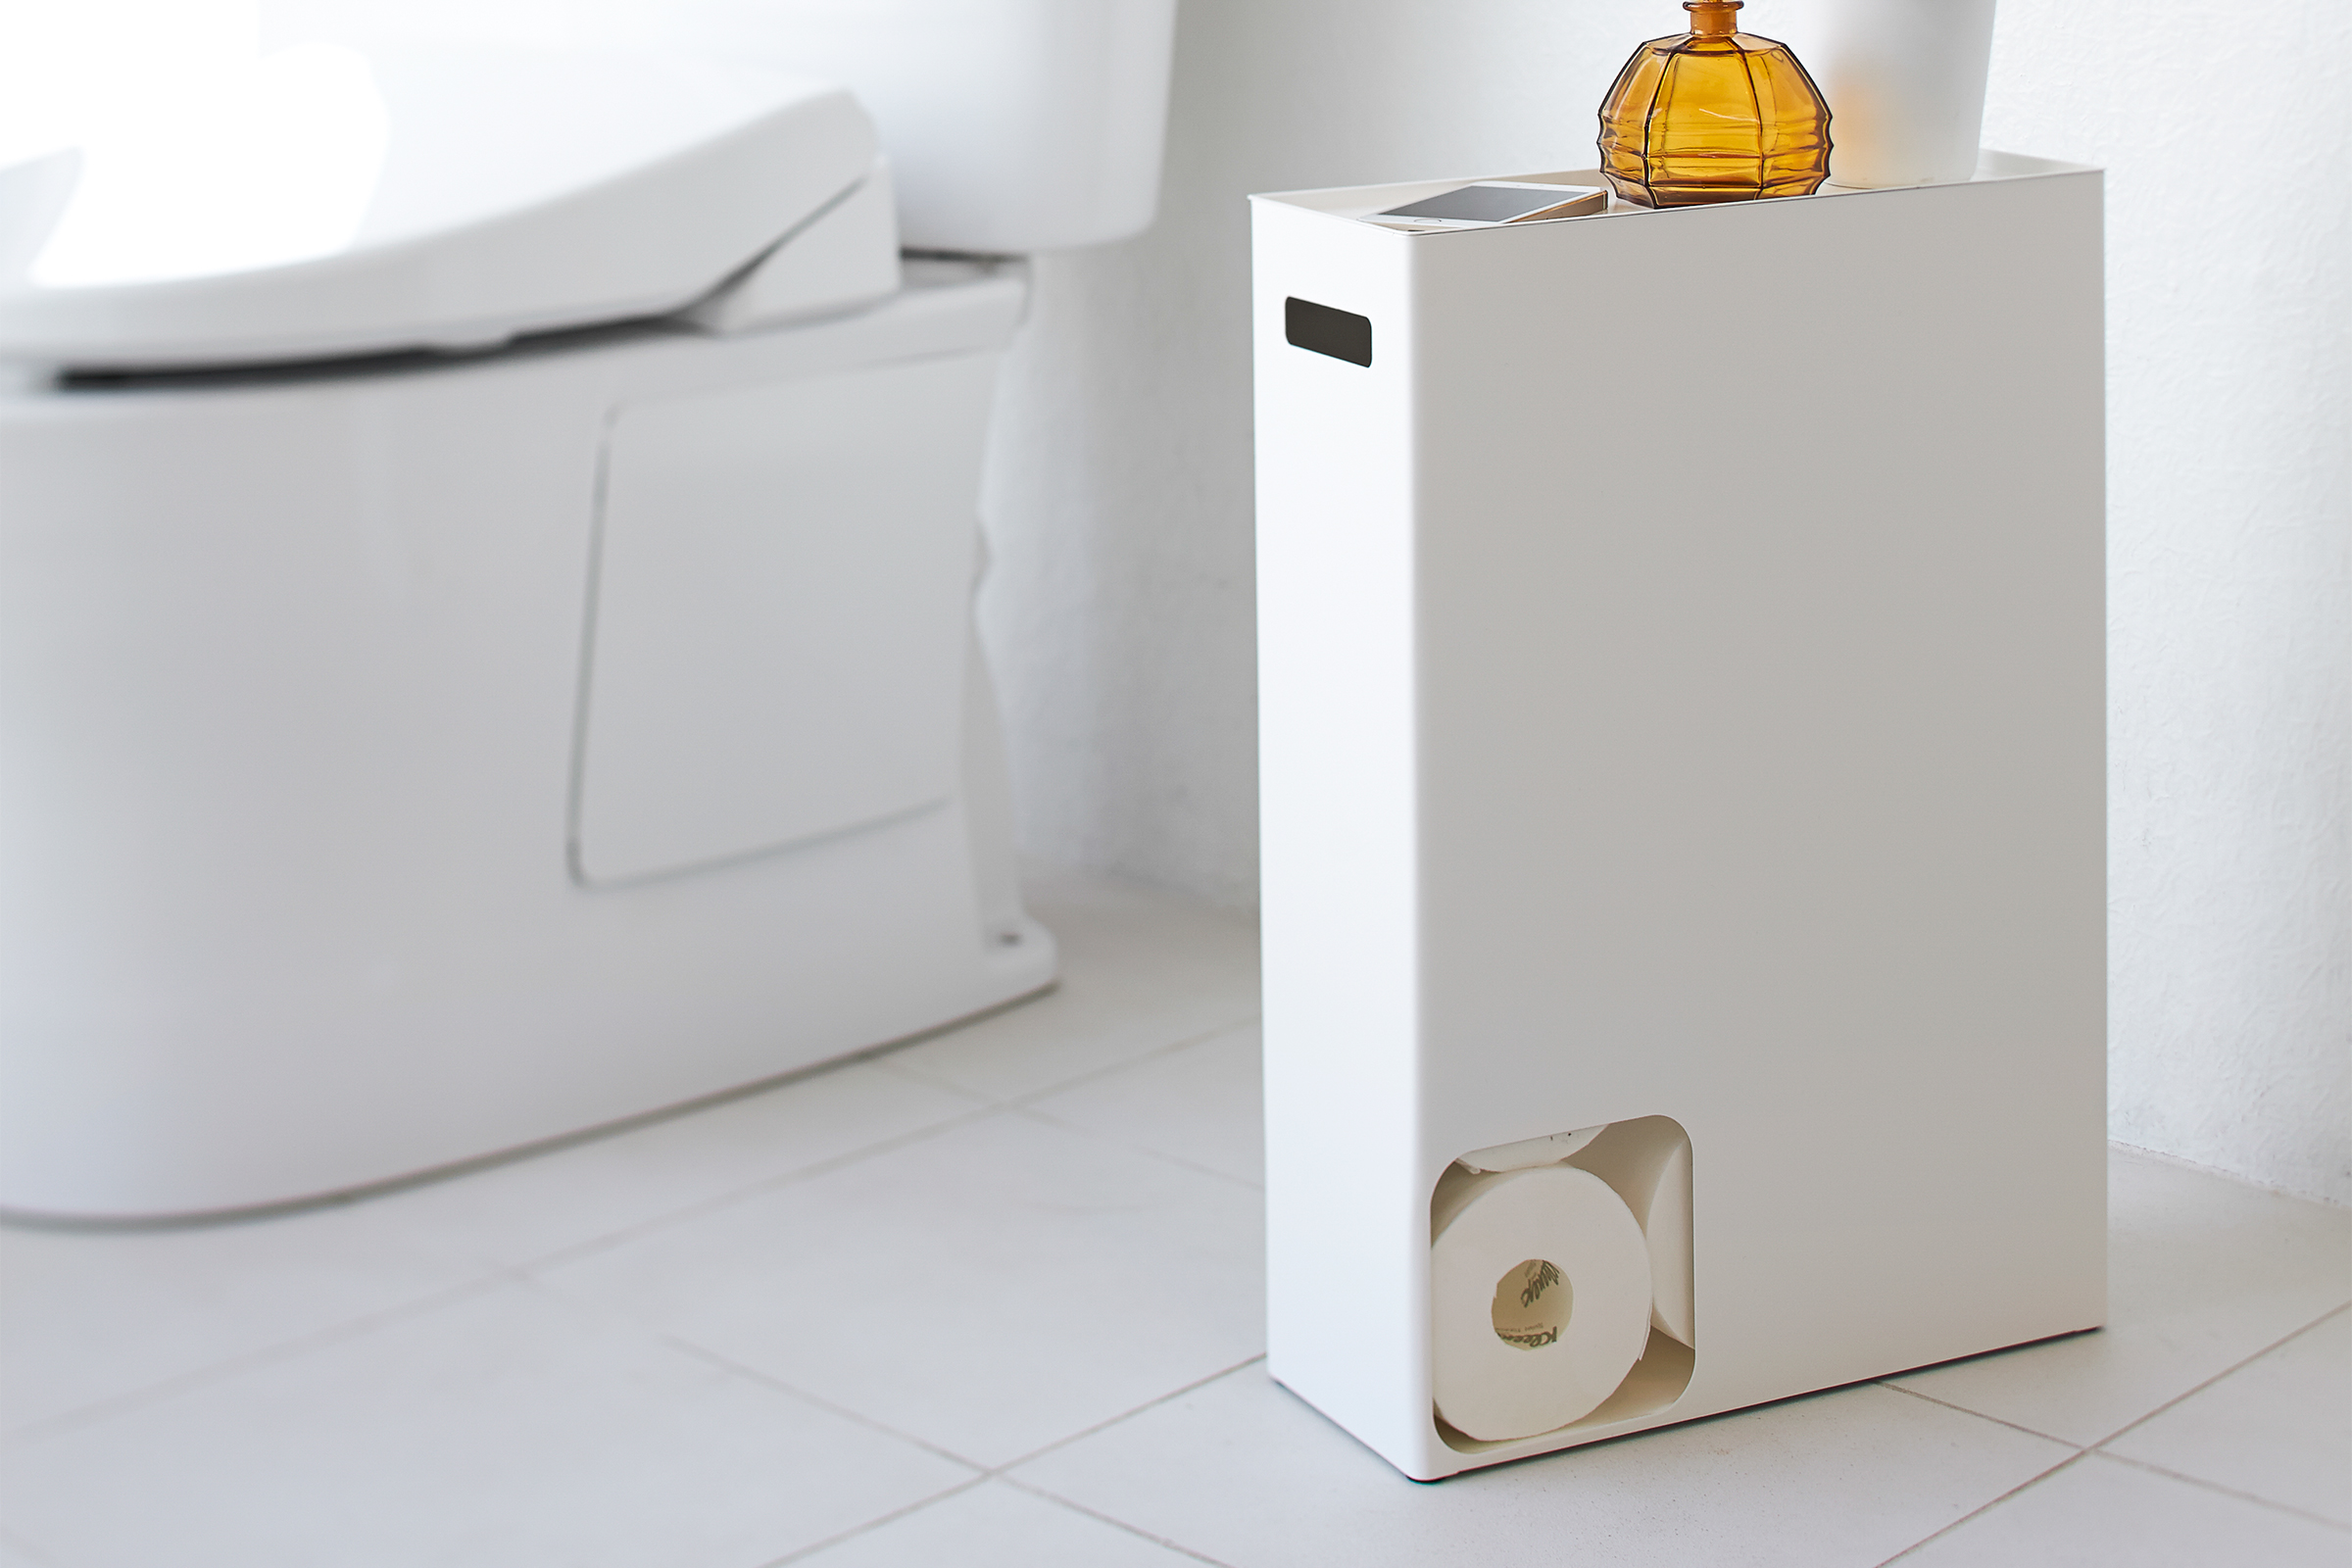 Front view of Yamazaki Home white Toilet Paper Stocker holding toilet paper and decor items in bathroom.